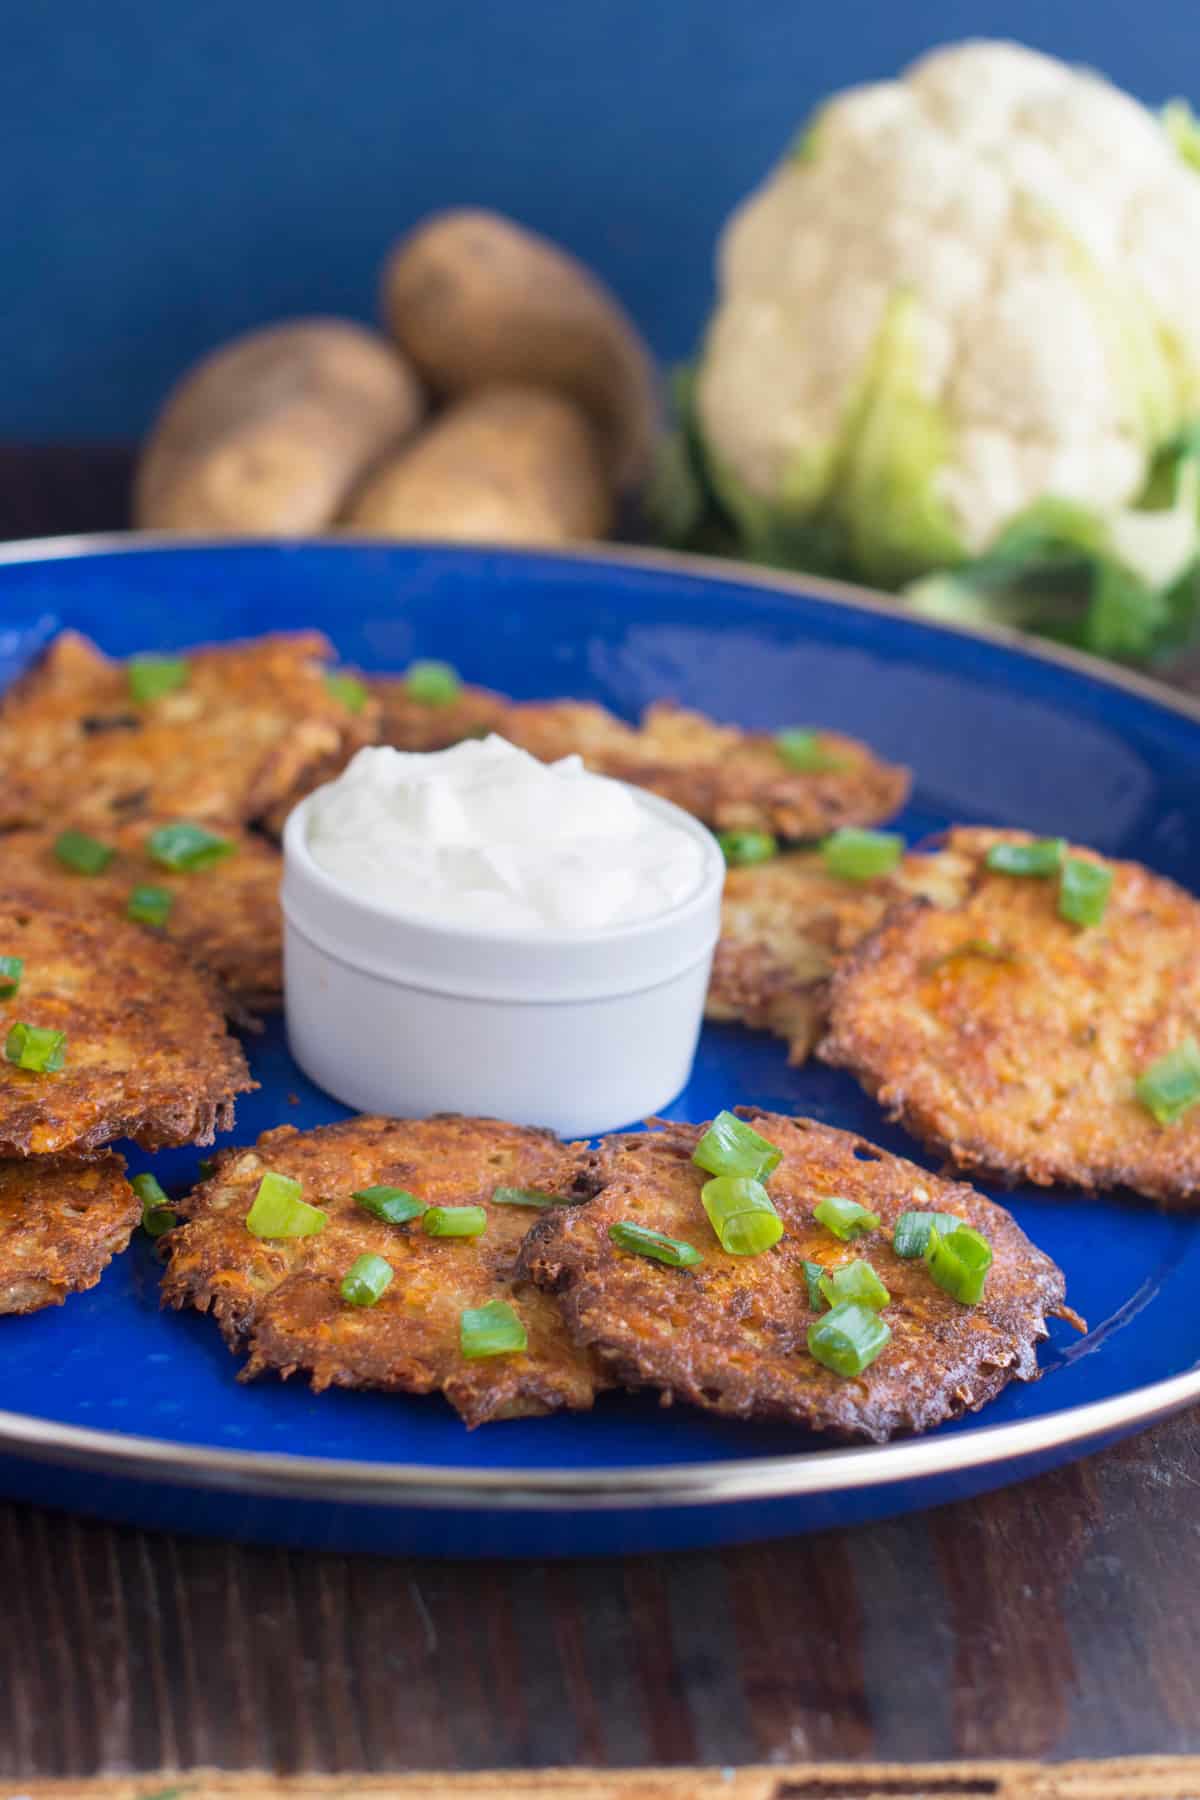 Baked Cauliflower and Cheese Latkes on blue plate
